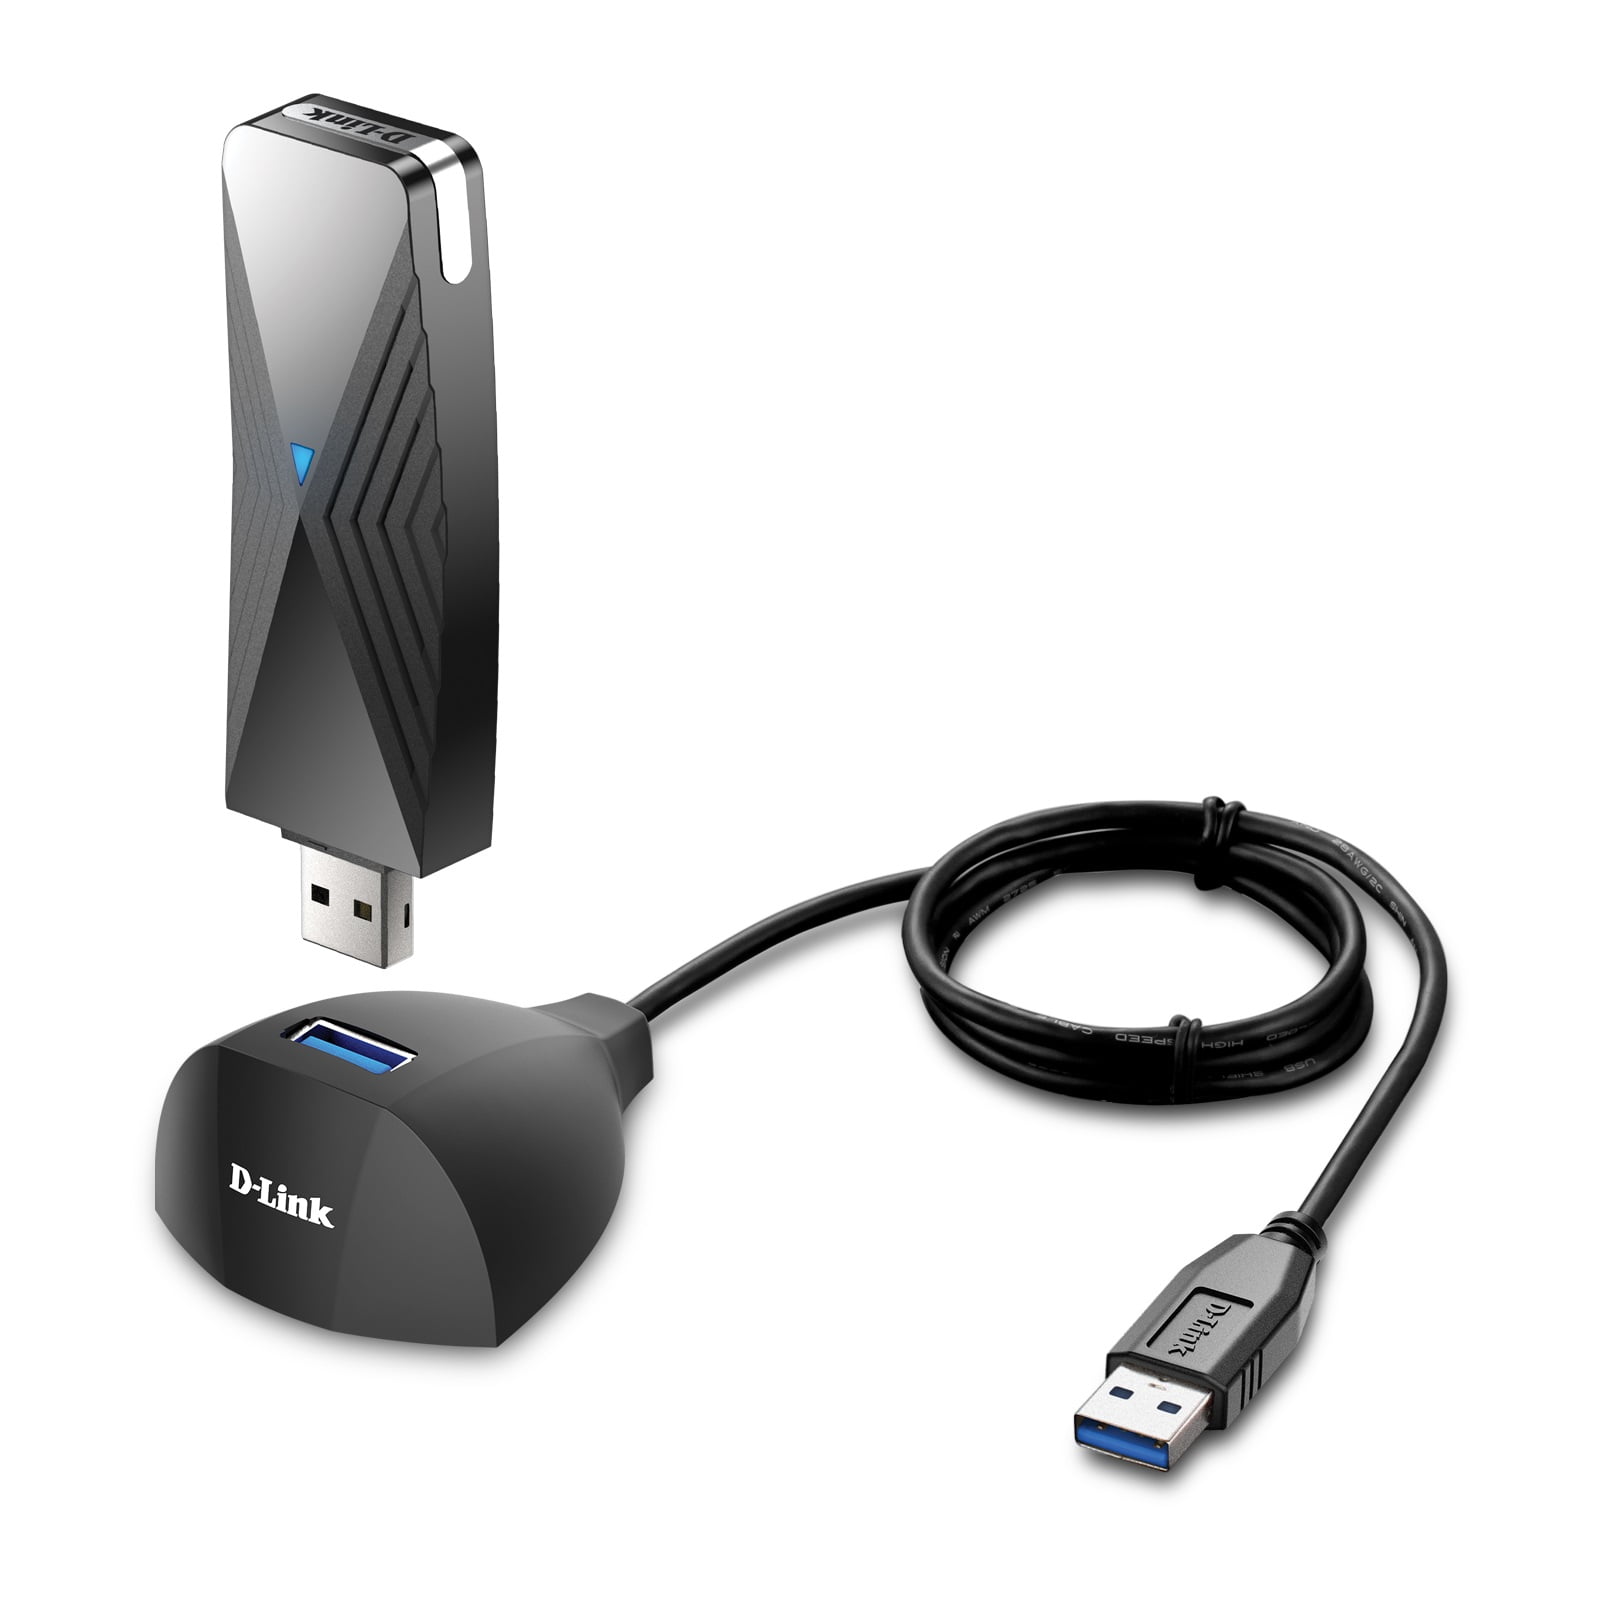 D-Link VR Air Bridge - Dedicated Wireless Connection between Meta Quest 2 [Oculus] and Gaming PC for 360 Movement - Powered Quest Link Software (DWA-F18) - Walmart.com